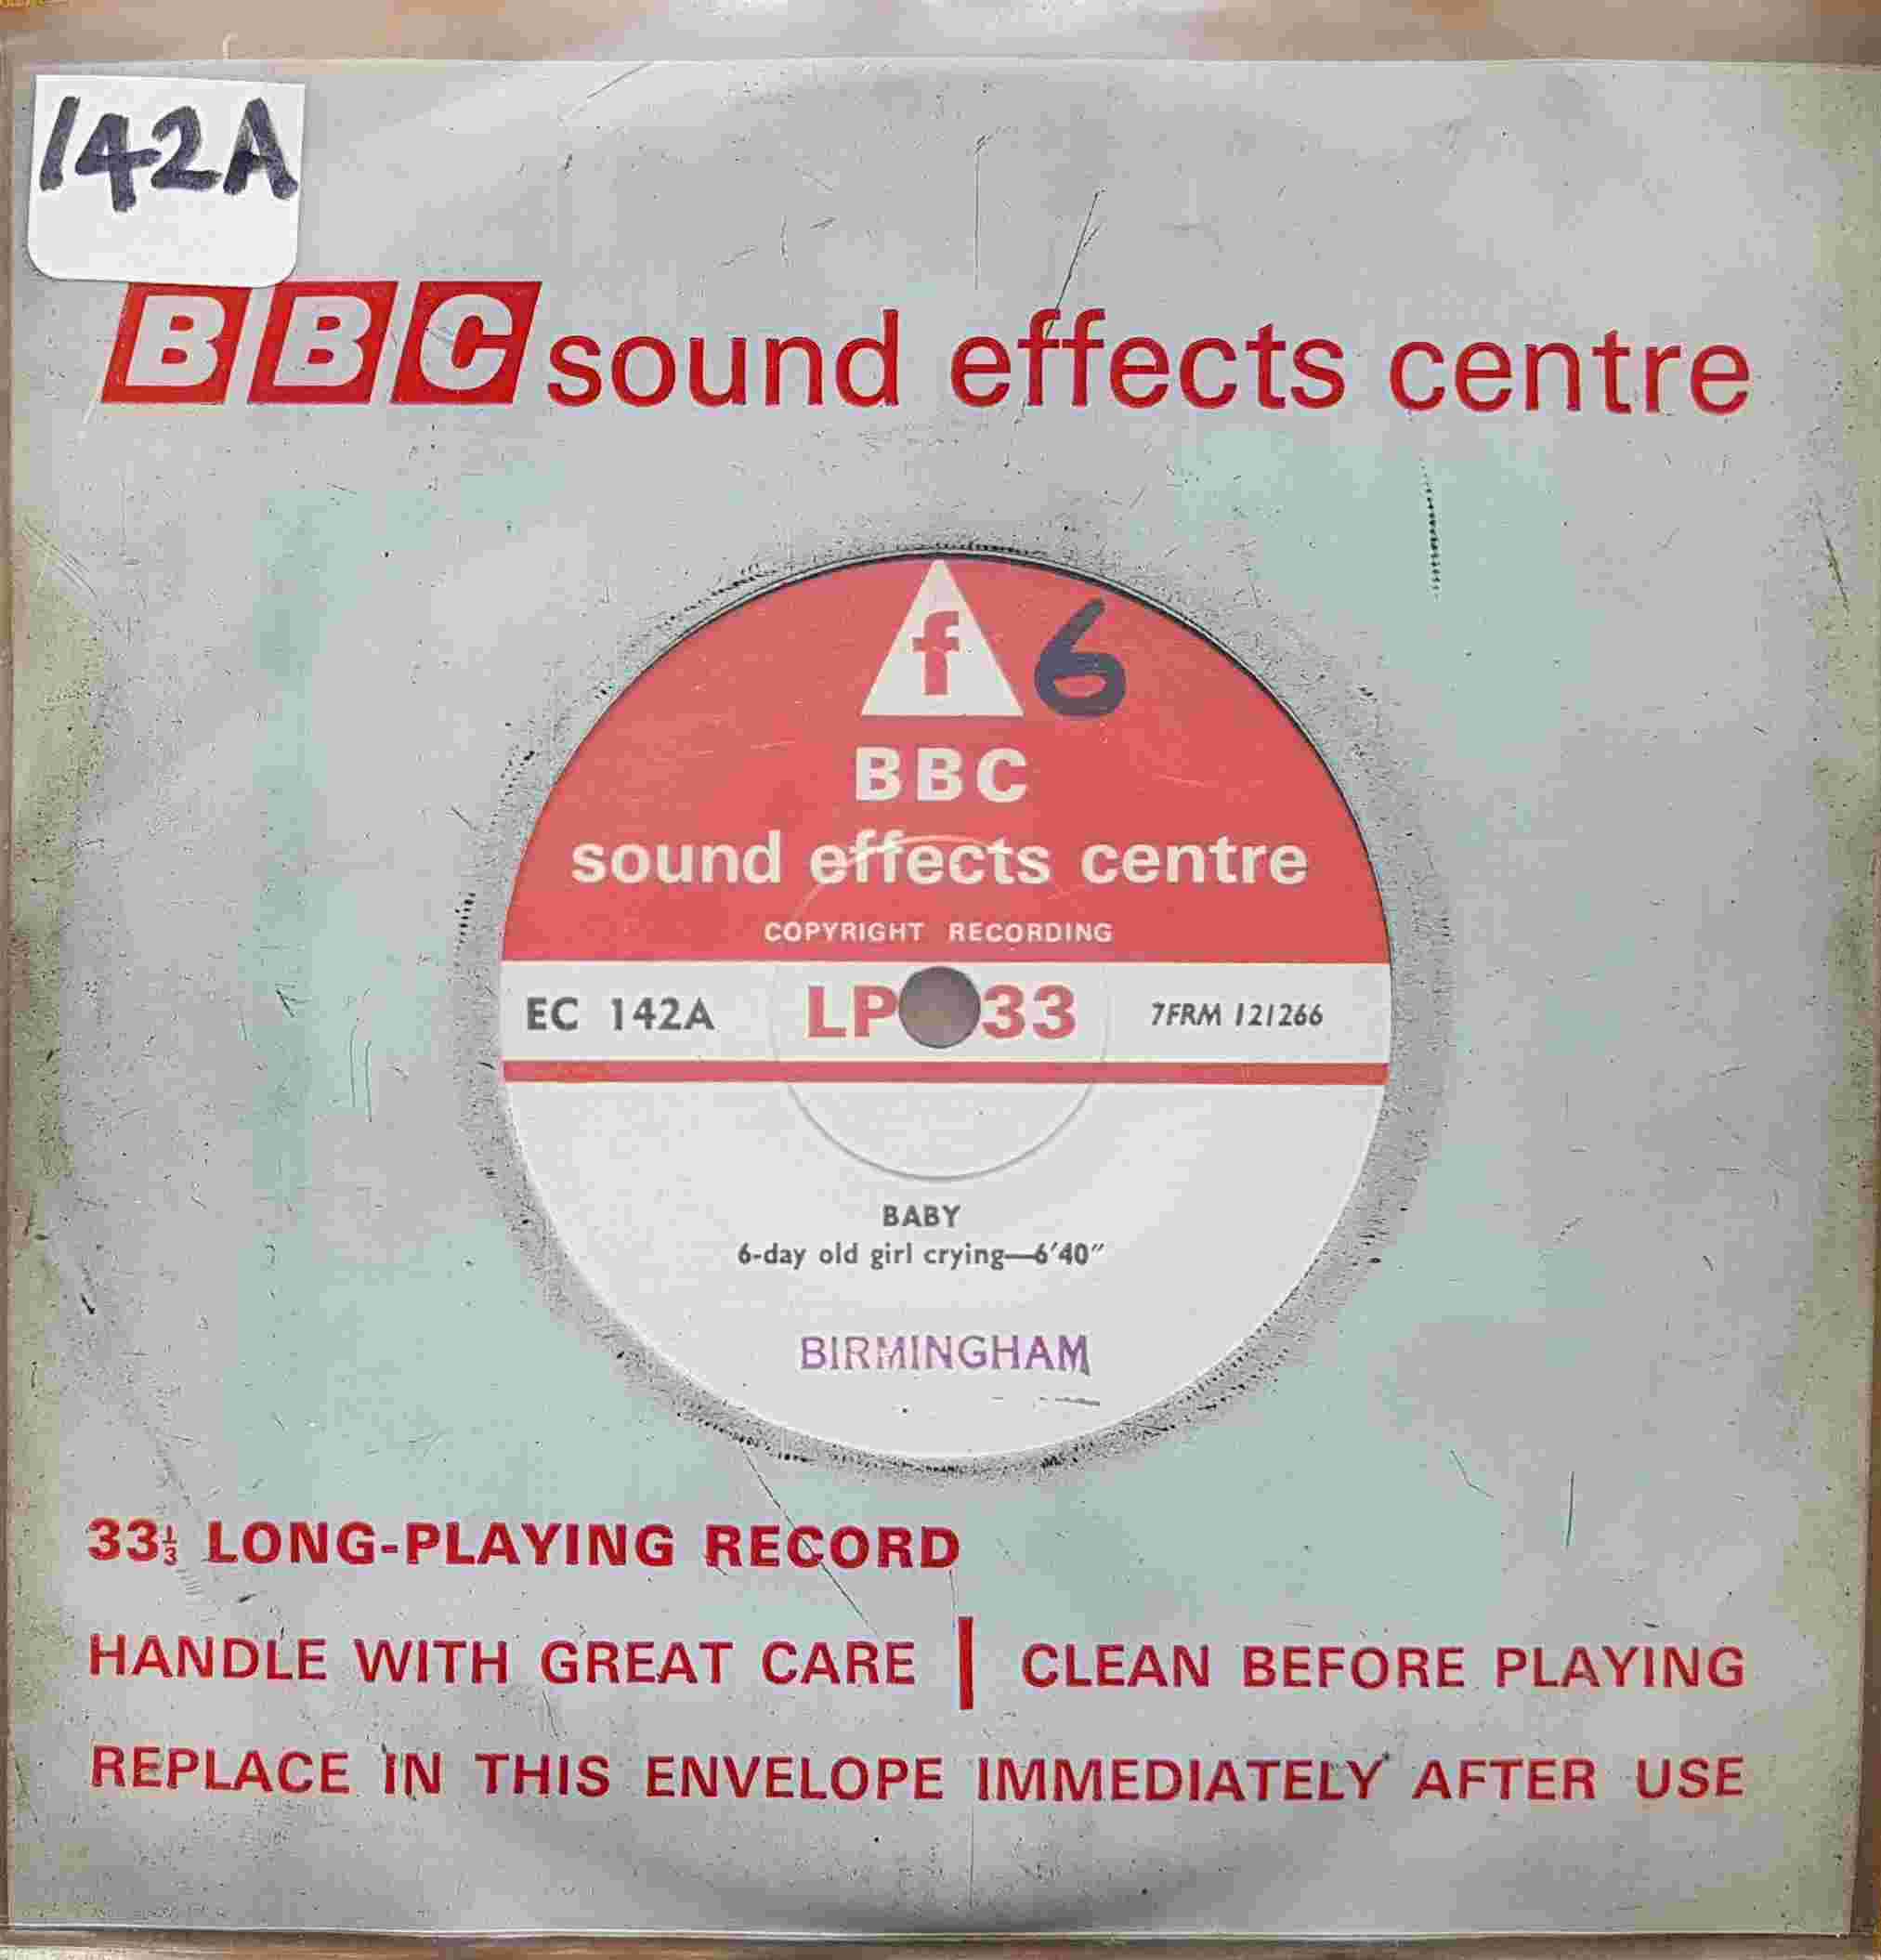 Picture of EC 142A Baby by artist Not registered from the BBC records and Tapes library